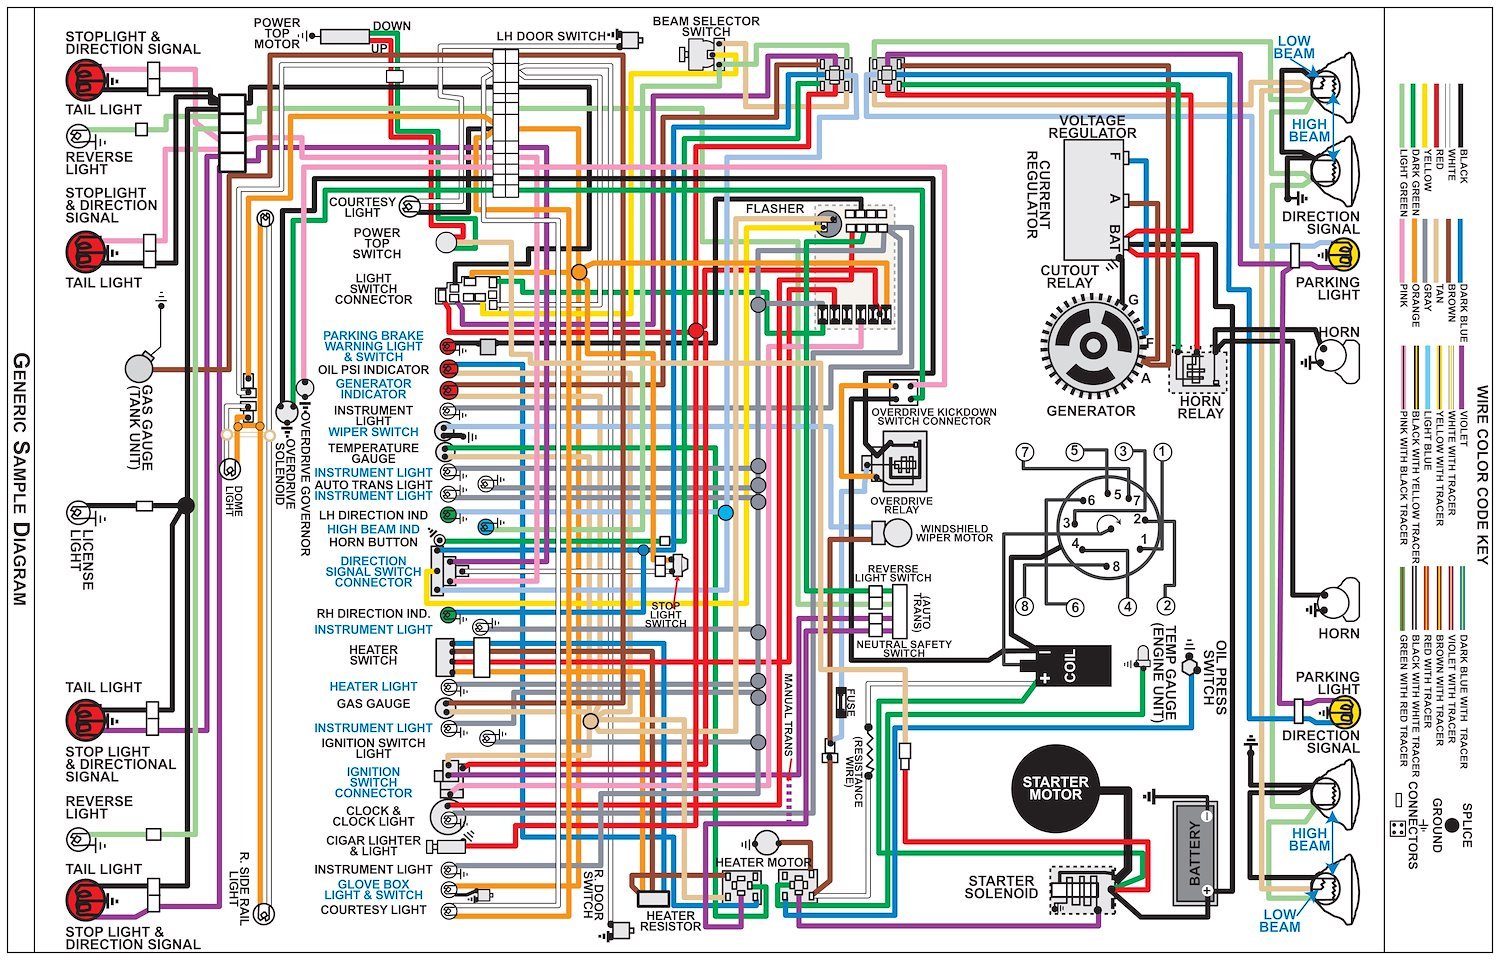 Wiring Diagram for 1969 Ford Galaxie, 11 in x 17 in., Laminated